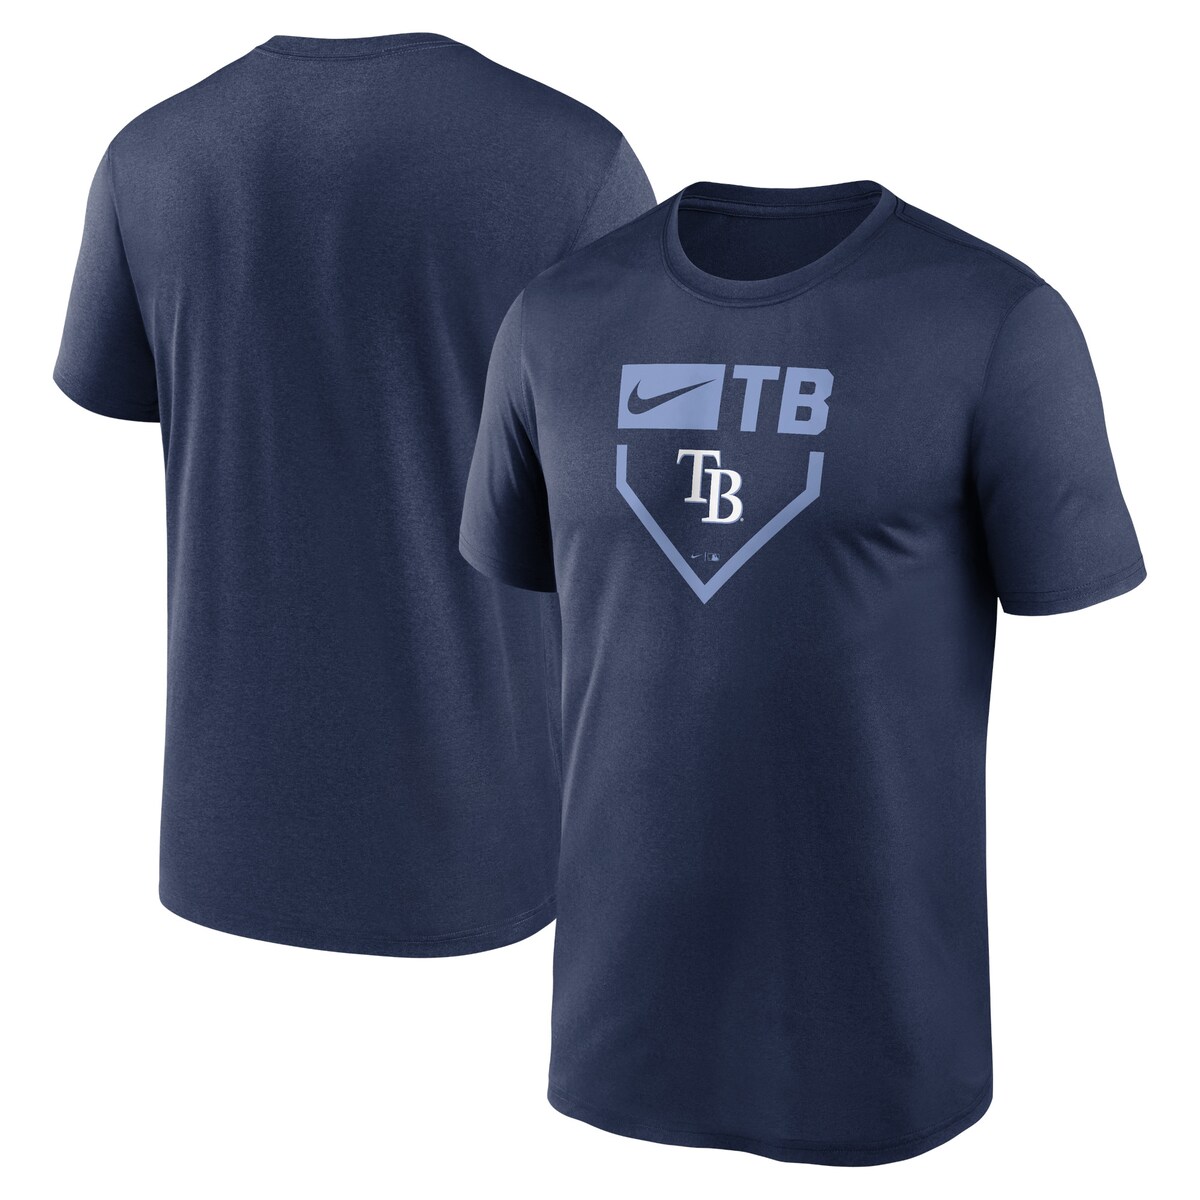 MLB CY TVc Nike iCL Y lCr[ (Men's Nike MLB Home Plate Icon Legend Tee SP24)